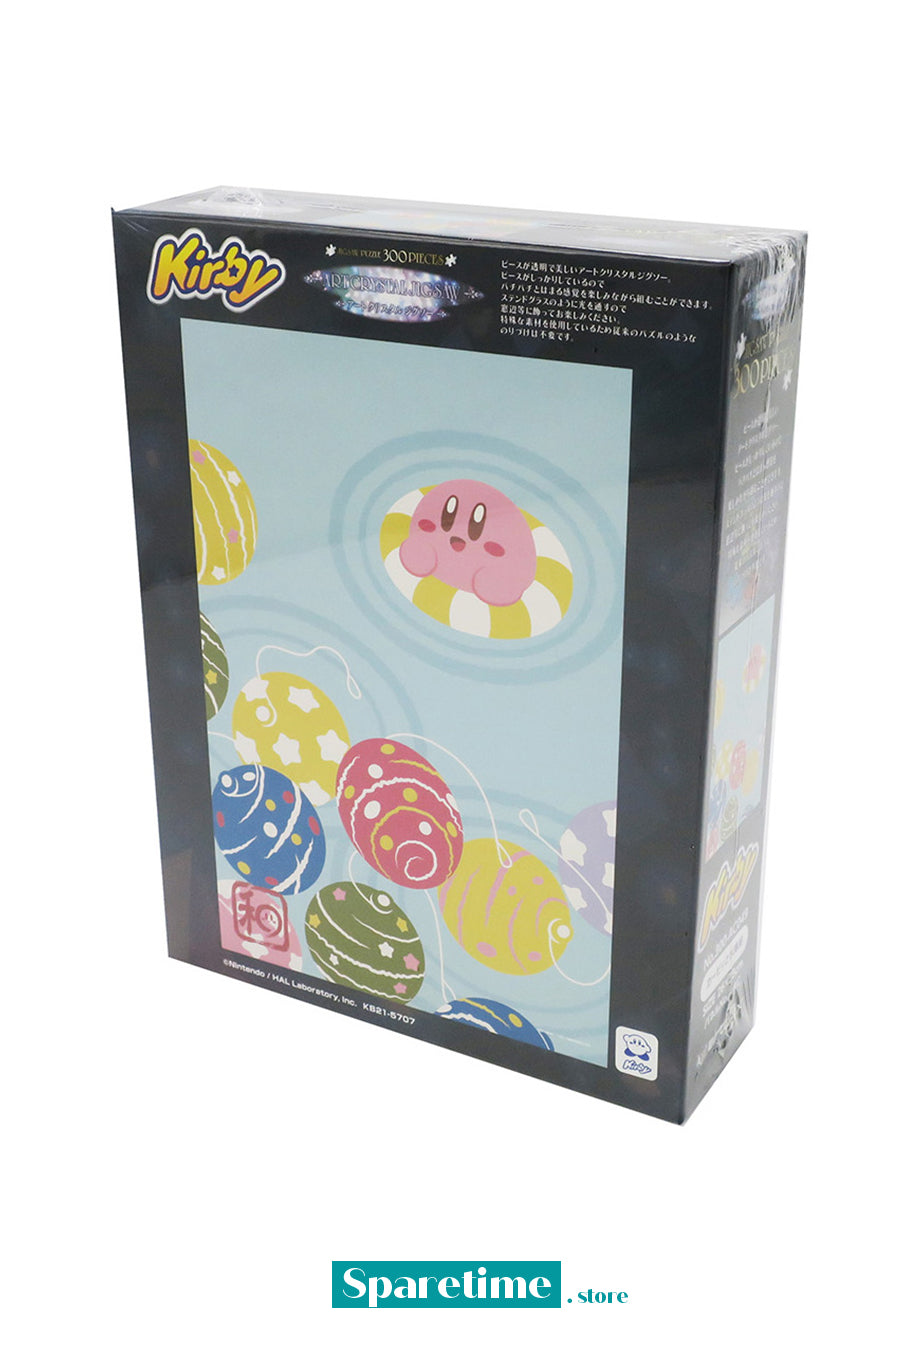 Kirby and Water Balloons Artcrystal Puzzle (300-AC049) "Kirby", Ensky Artcrystal Puzzle